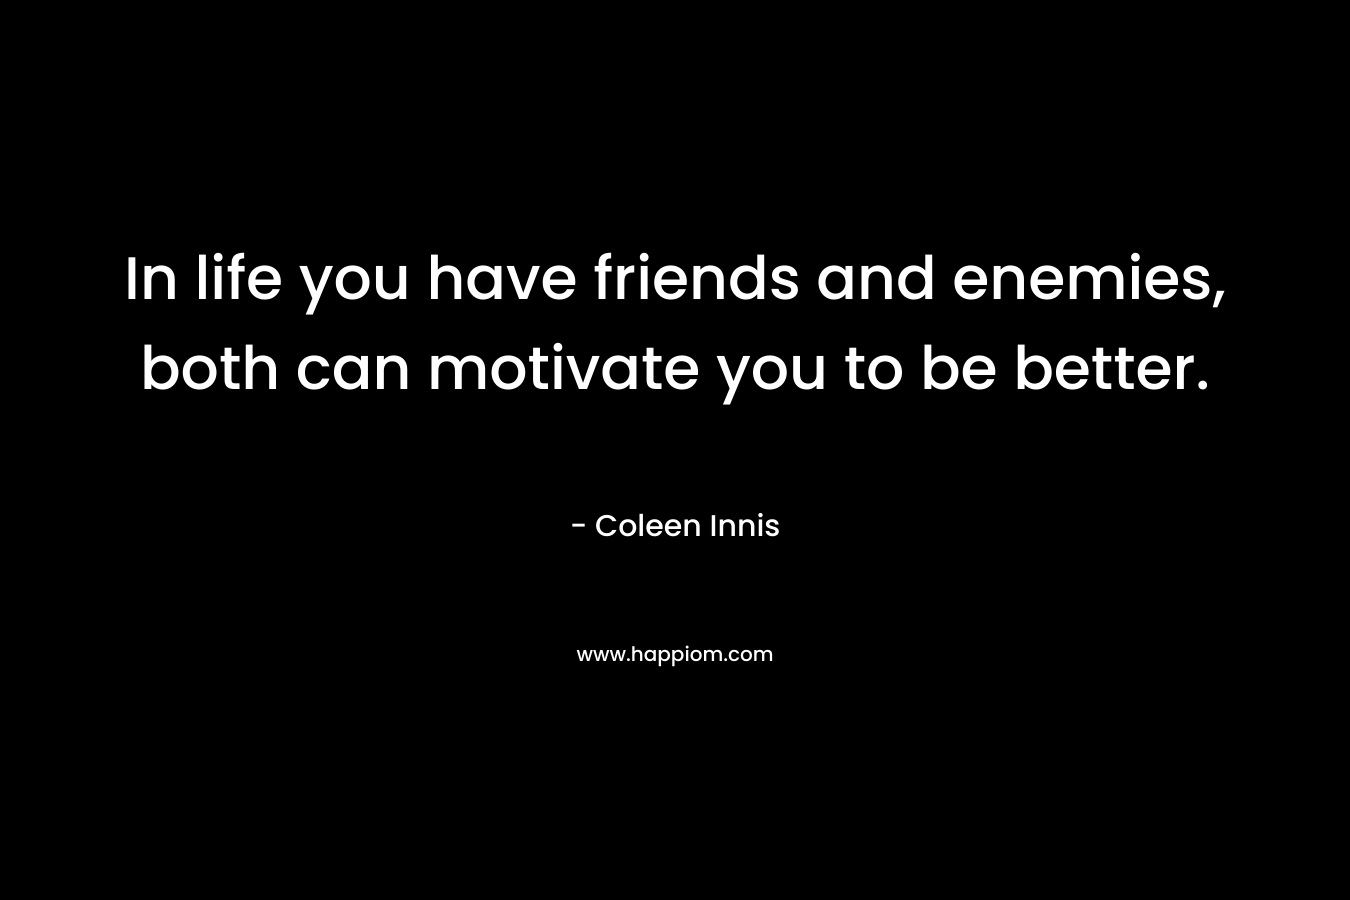 In life you have friends and enemies, both can motivate you to be better. – Coleen Innis